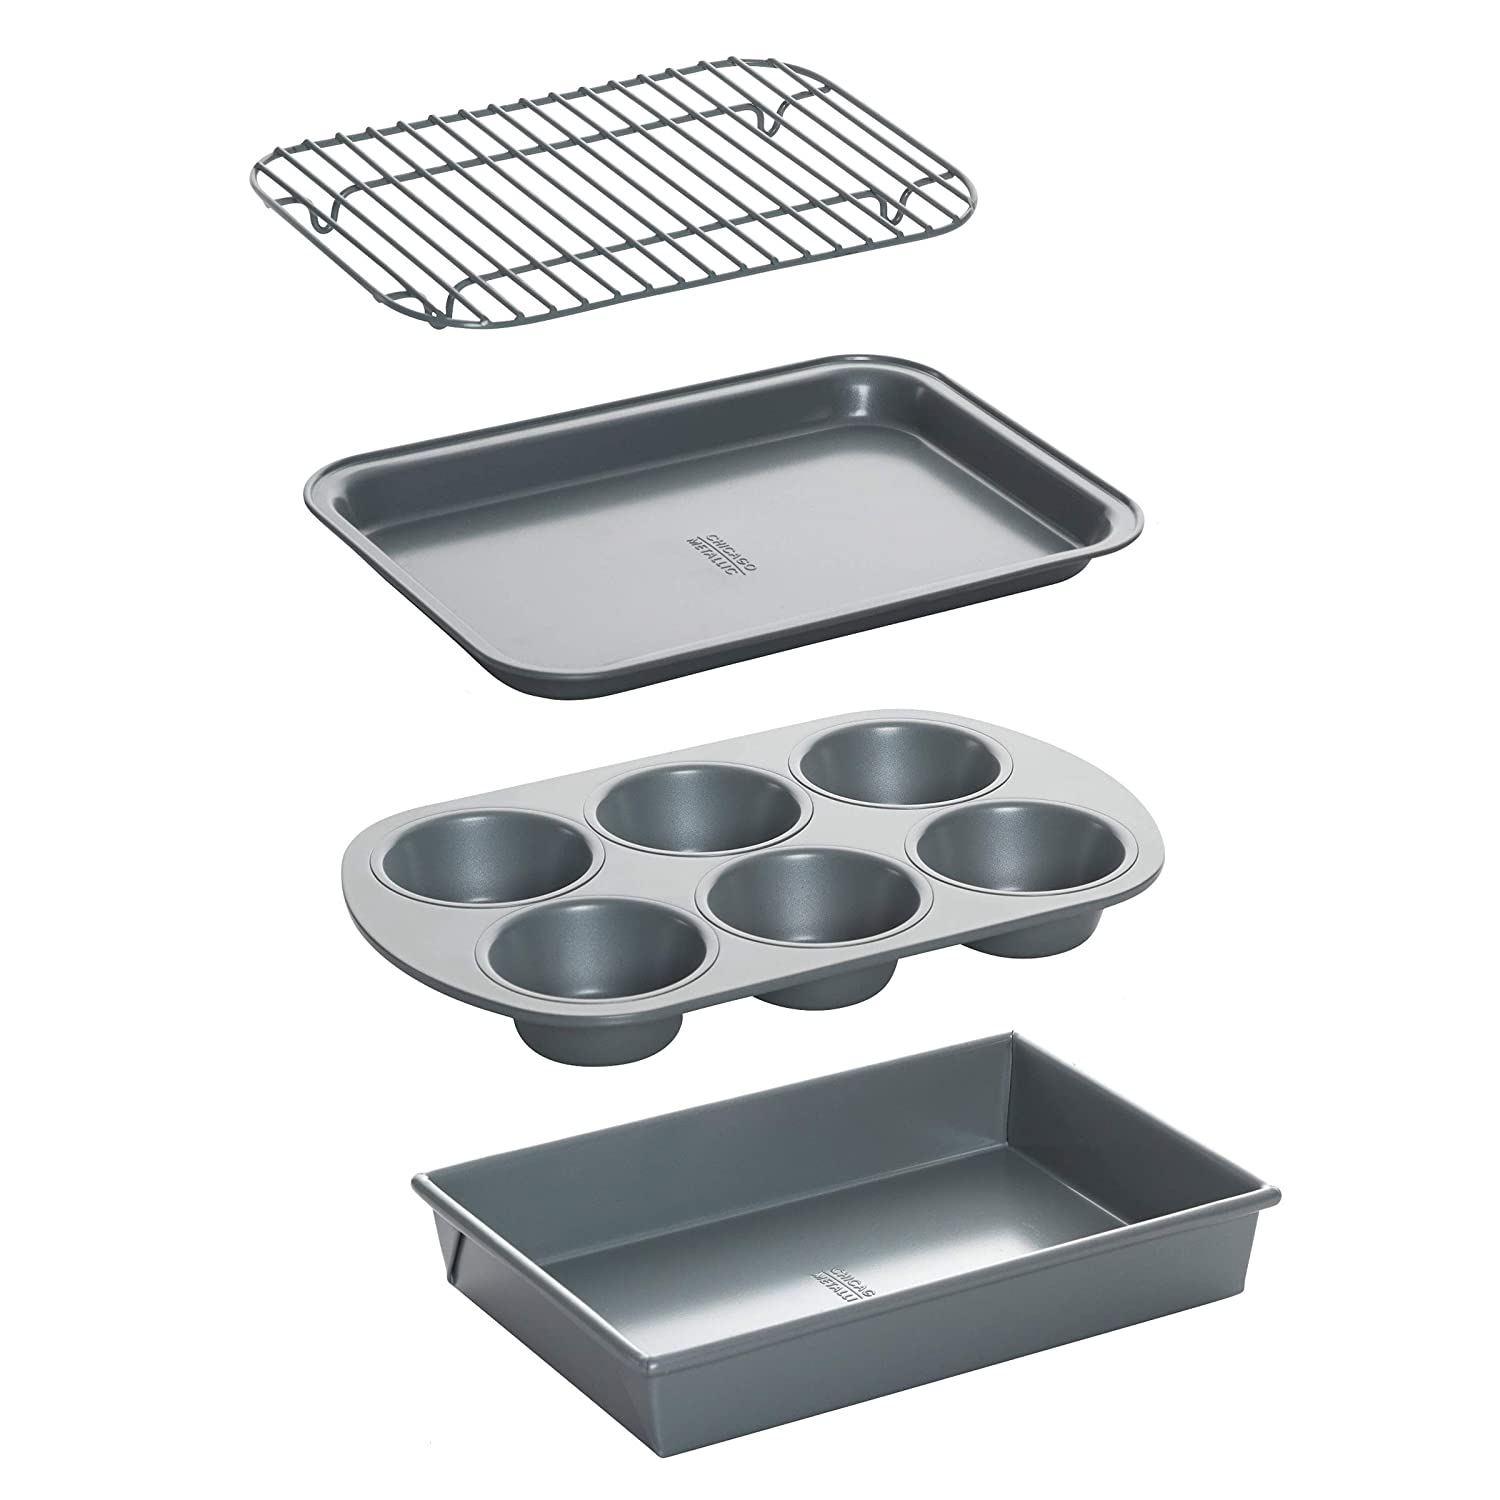 Best Baking Pans For Convection Oven